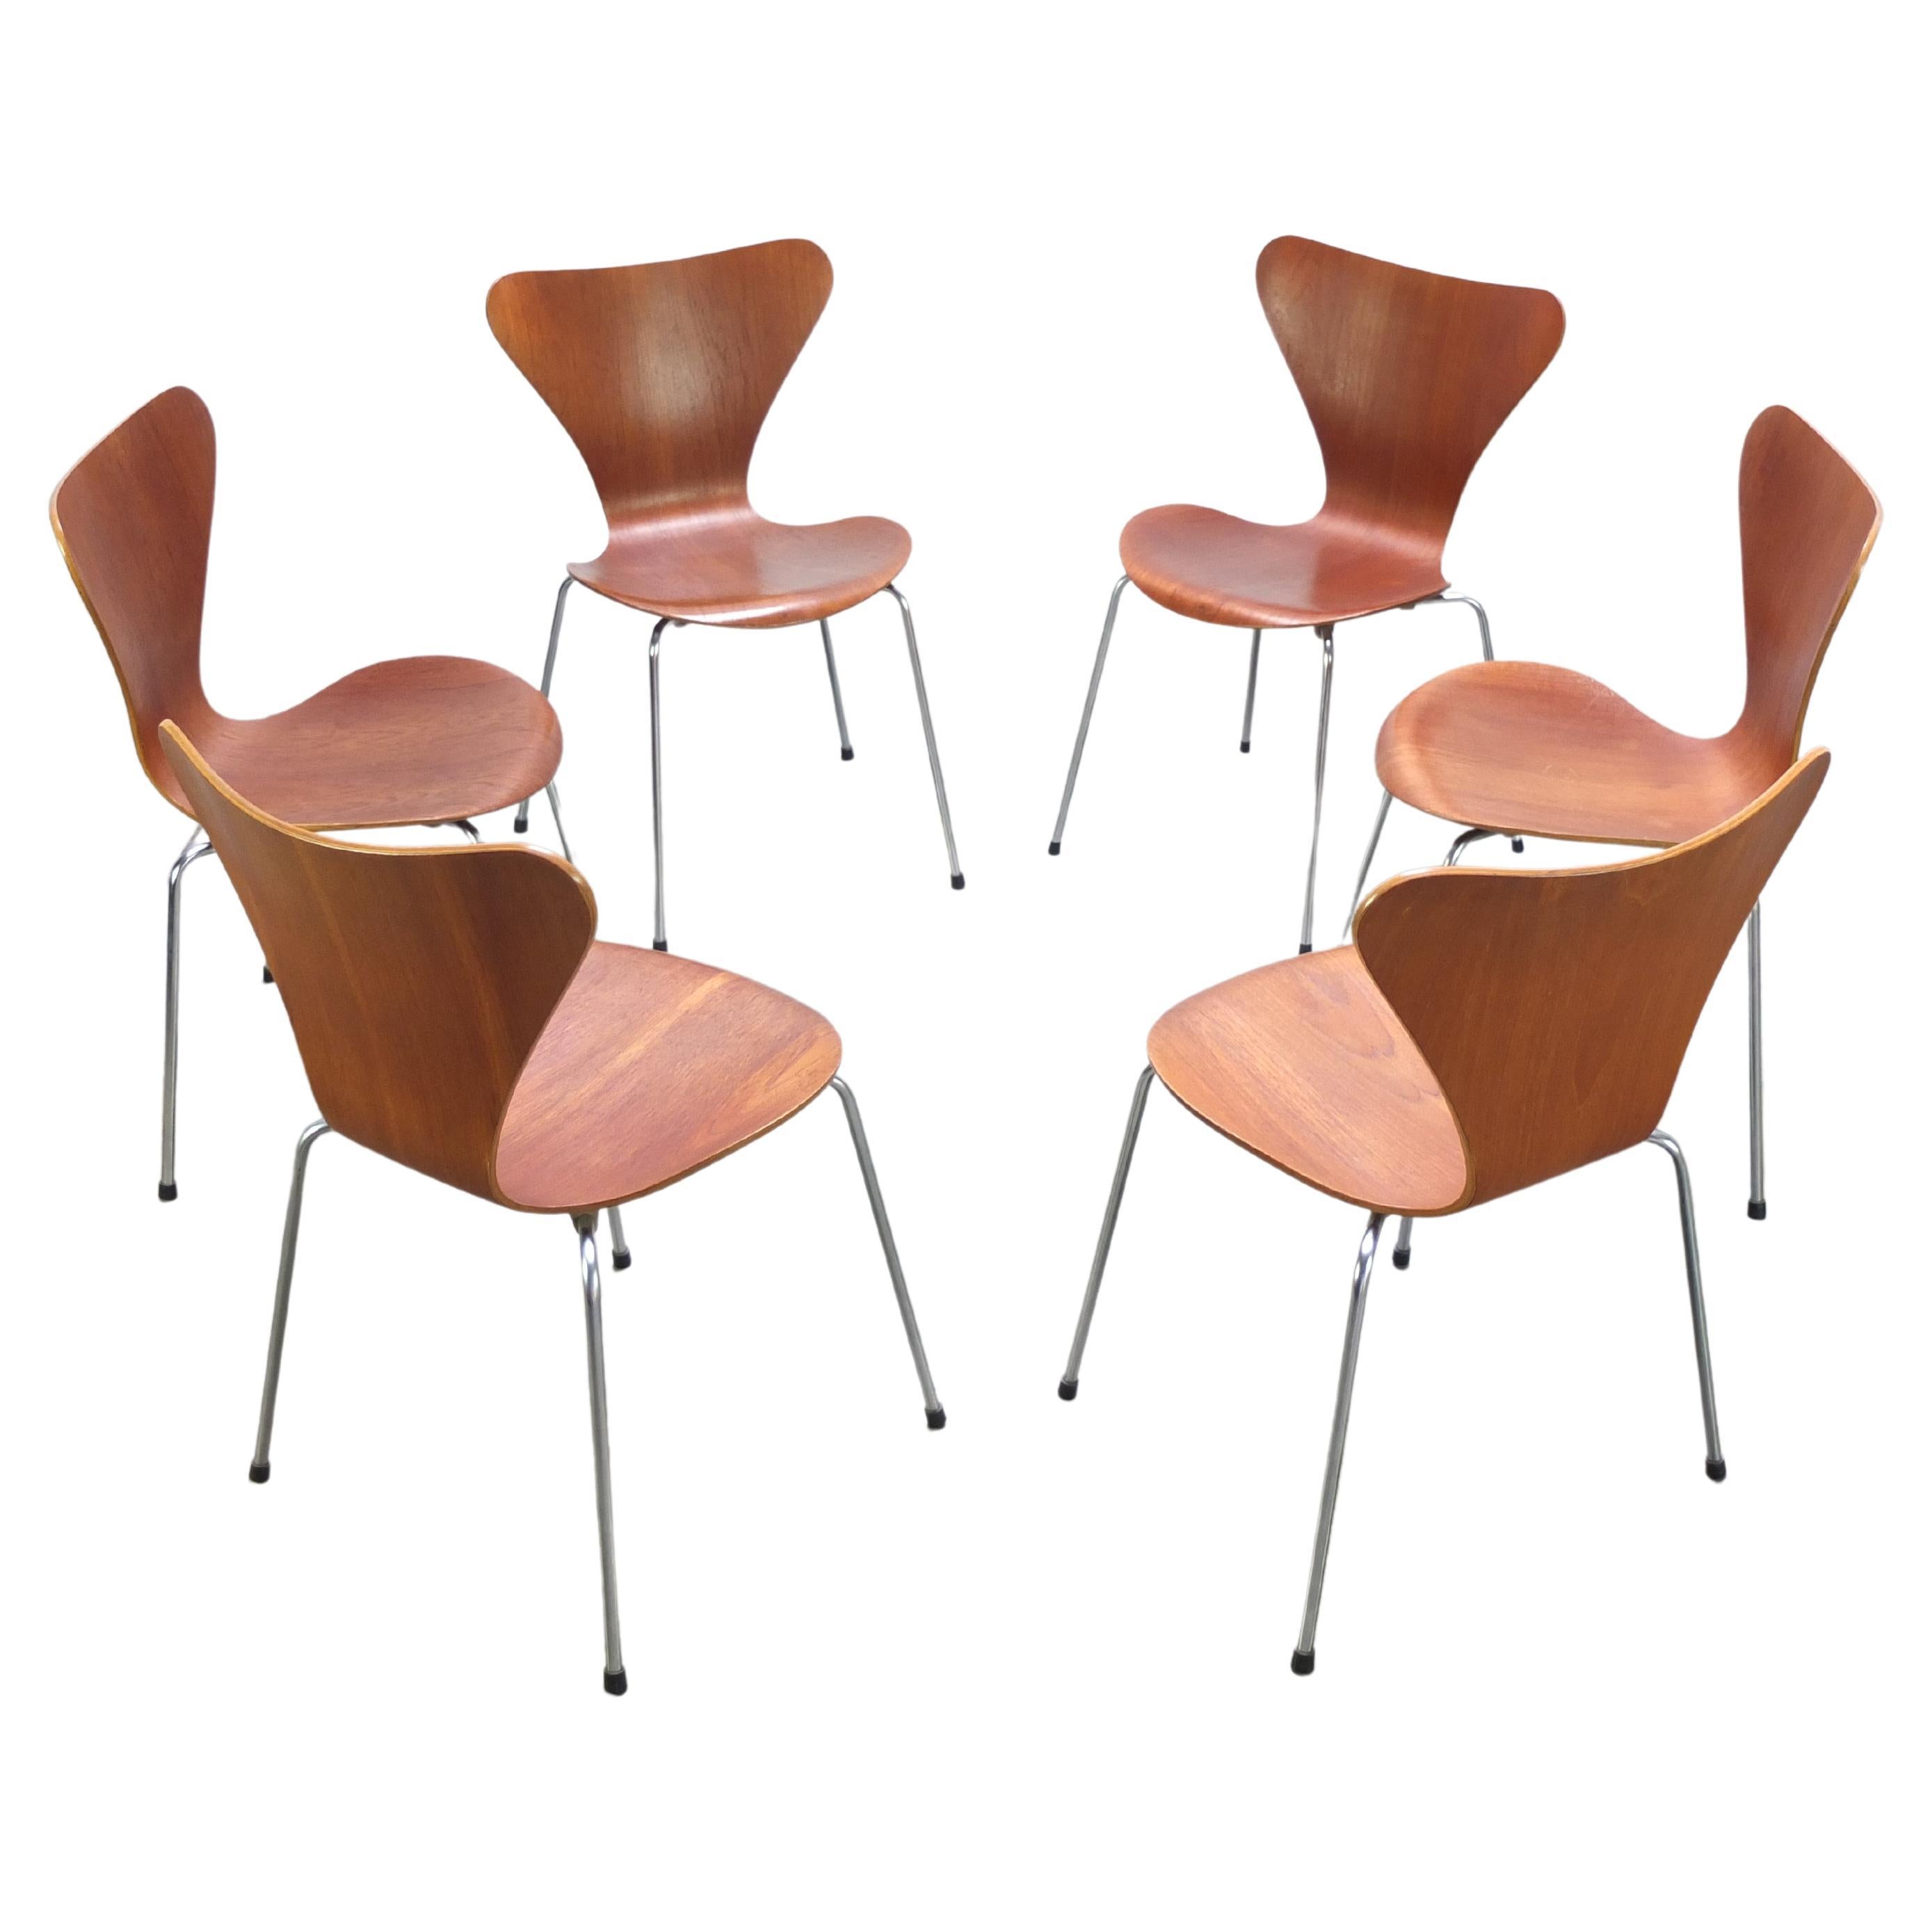 Early Set of 6 Teak 'Series 7' Chairs by Arne Jacobsen for Fritz Hansen, 1955